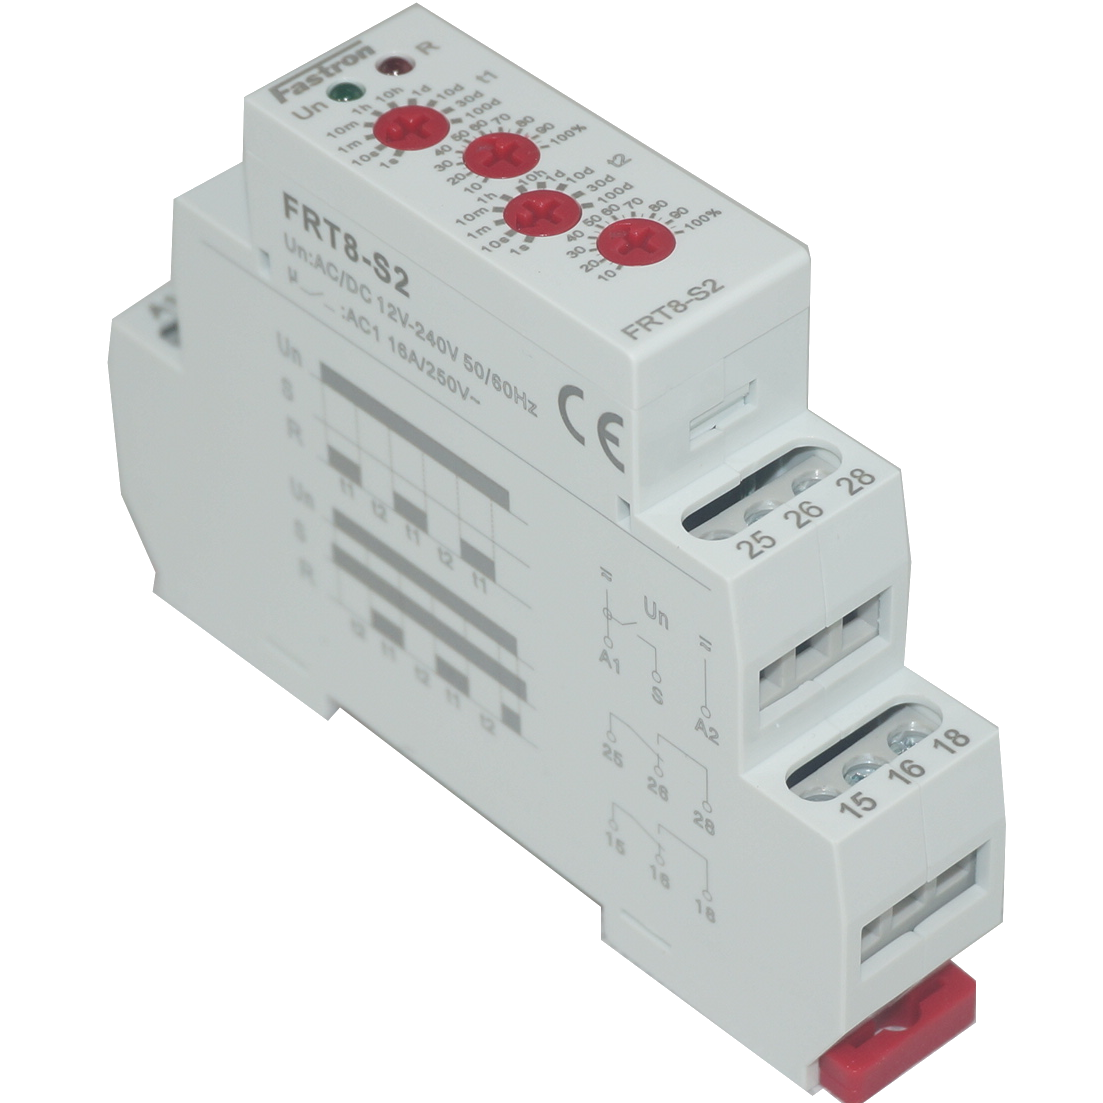 FRT8-S2/W240, Asymmetric T1-T2 Timer 12-240 V AC/DC, 0.1s - 100 Days, 2 x SPDT 16 Amp, Can Replace Crouzet 88826155, 88827155